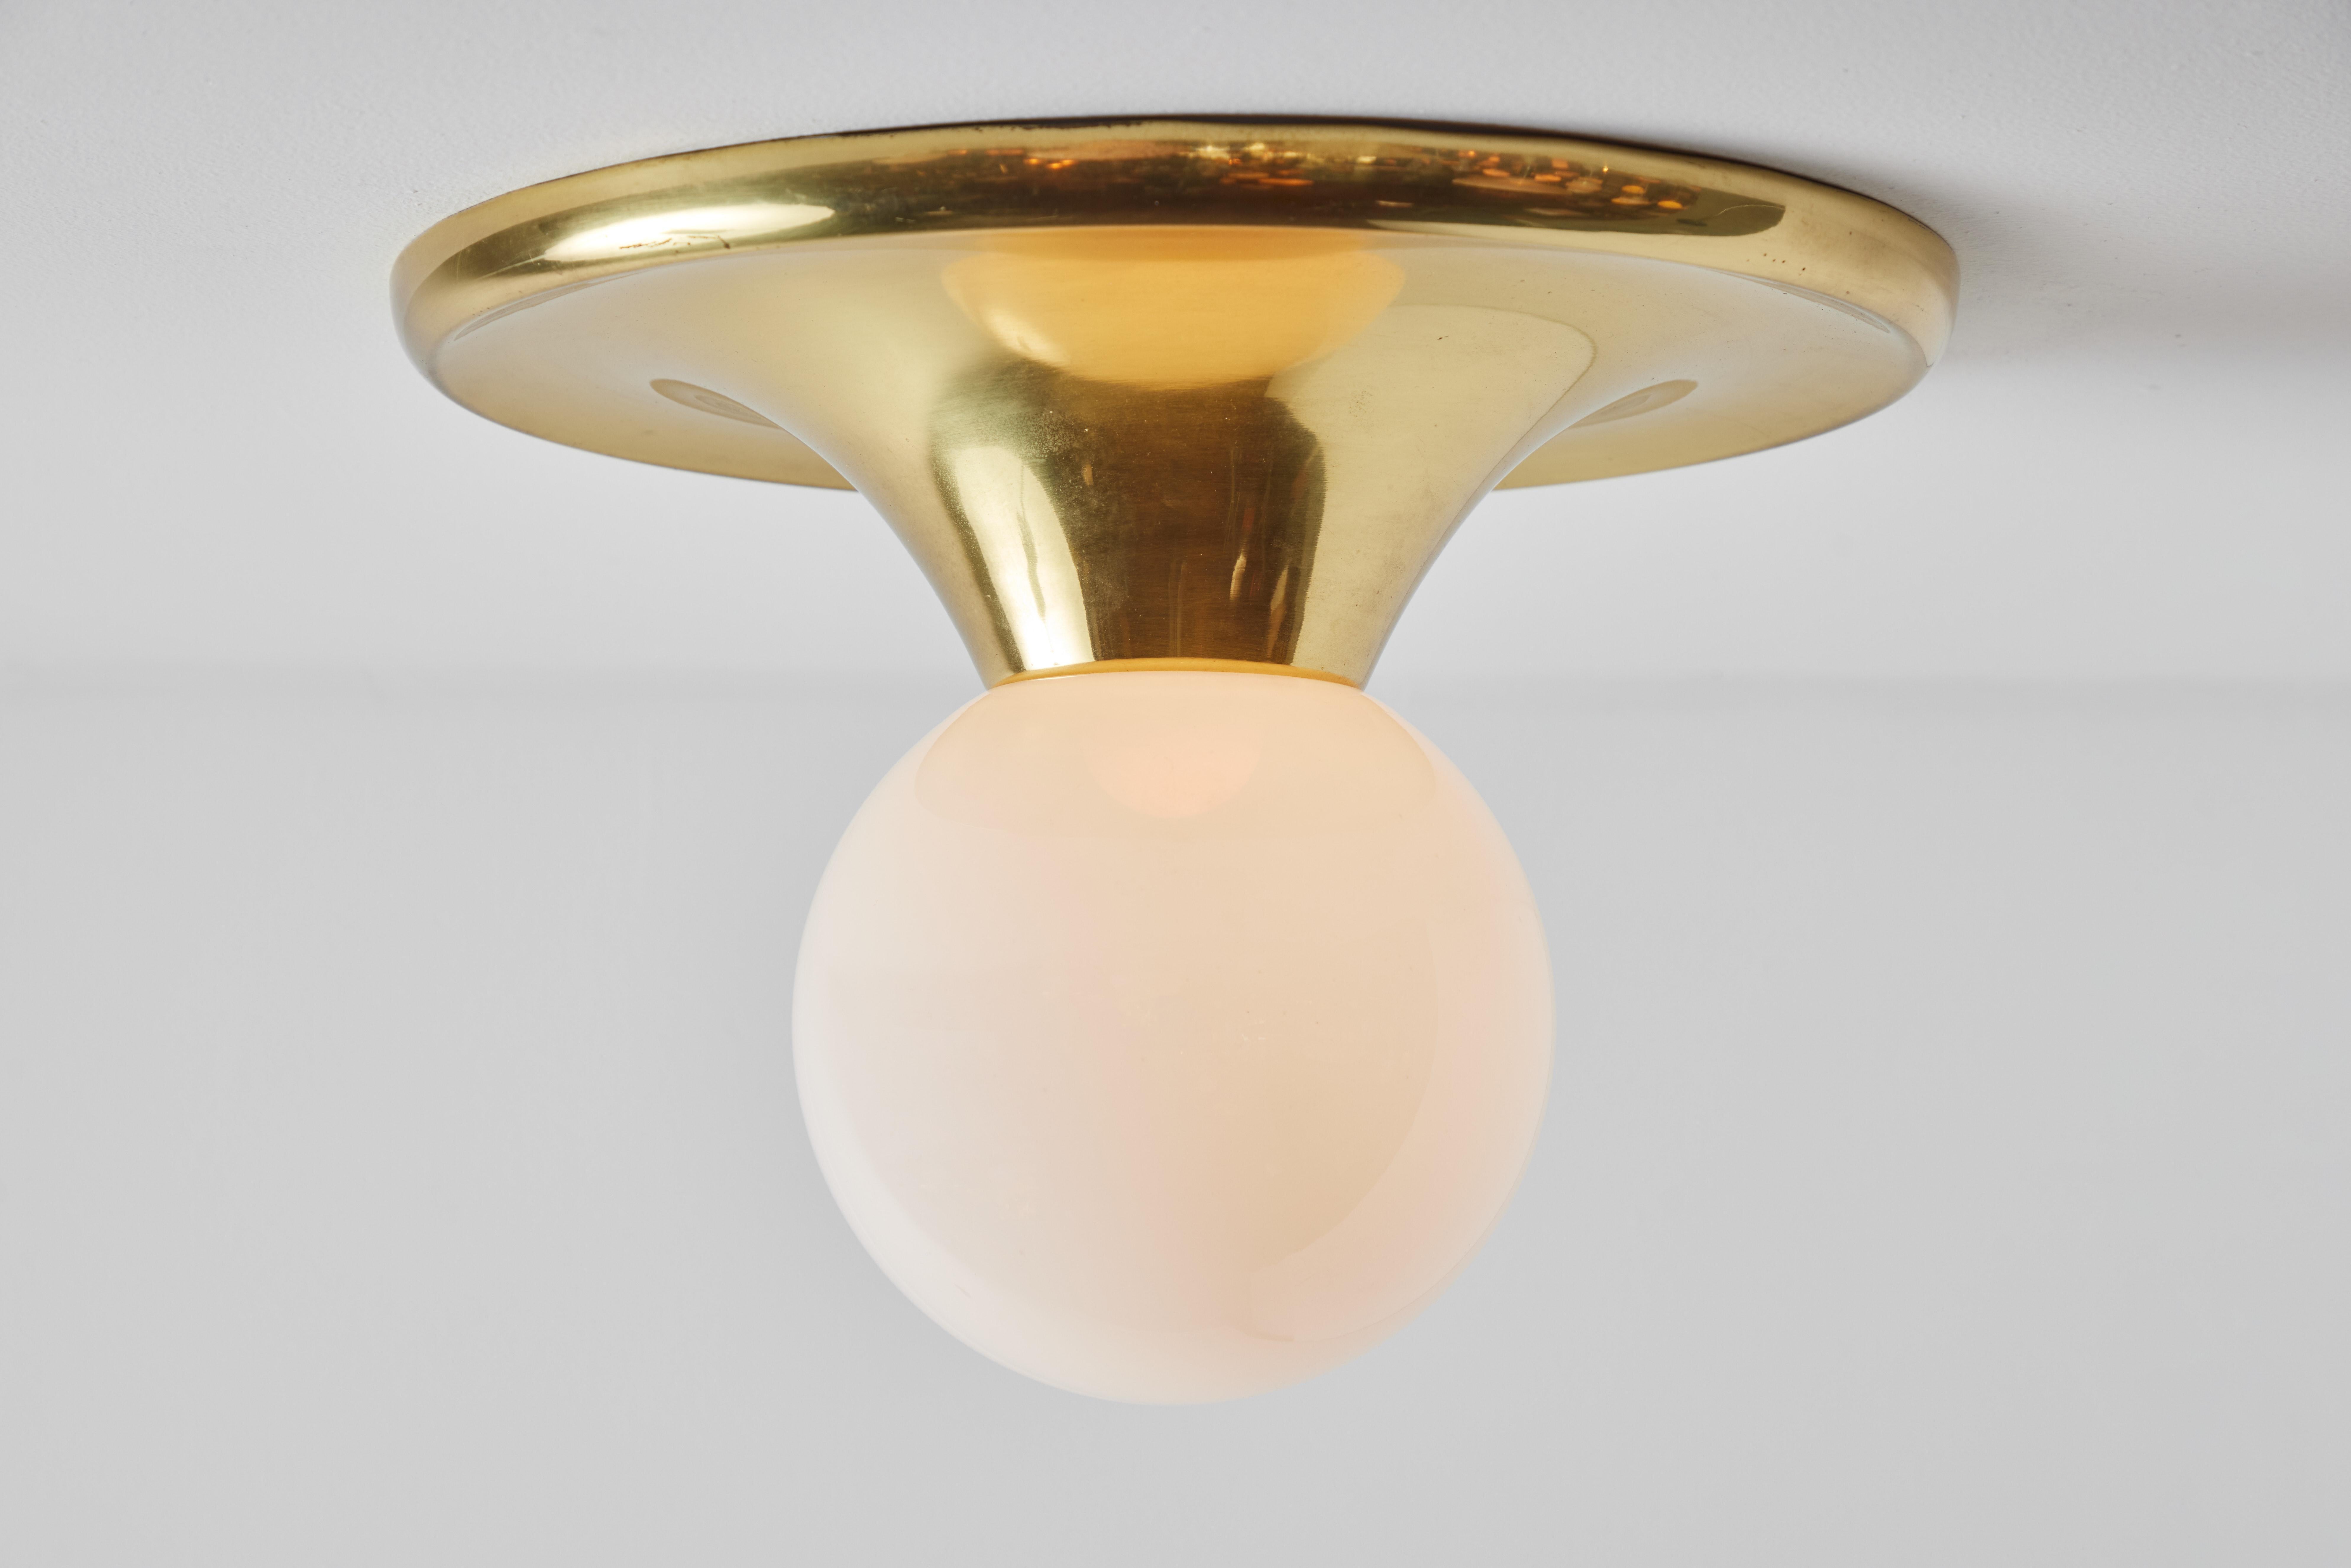 1960s Achille Castiglioni 'light ball' wall or ceiling lamp for Flos. Designed in 1965, this rare and vintage brass variant comes with satin opaque glass. An incredibly refined and iconic midcentury design that is quintessentially Italian. Retains